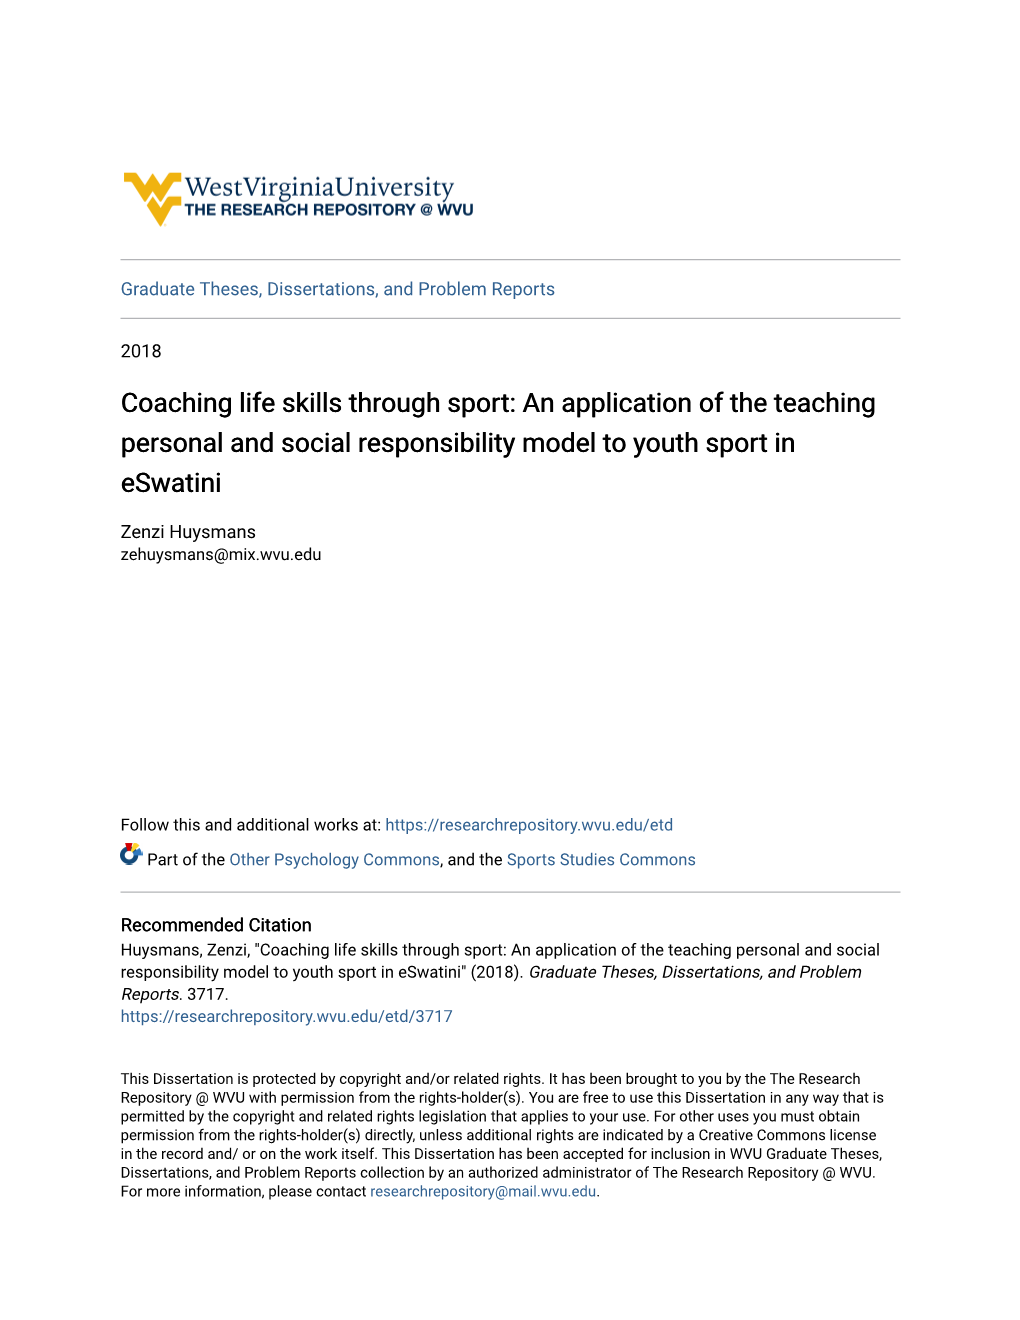 Coaching Life Skills Through Sport: an Application of the Teaching Personal and Social Responsibility Model to Youth Sport in Eswatini